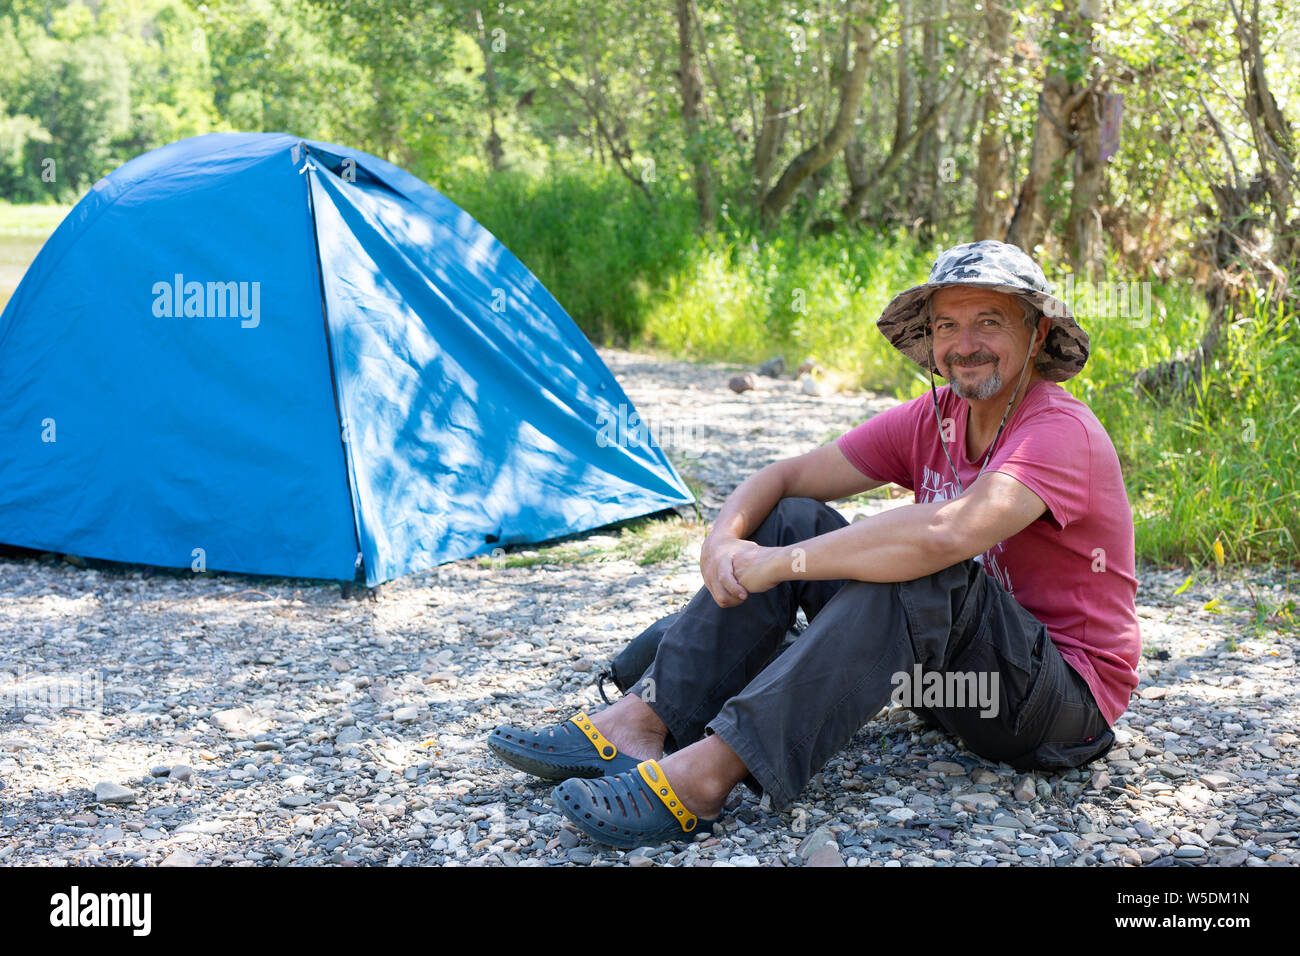 active lifestyle in old age concept, camping, tourism tourism in the elderly grow Stock Photo